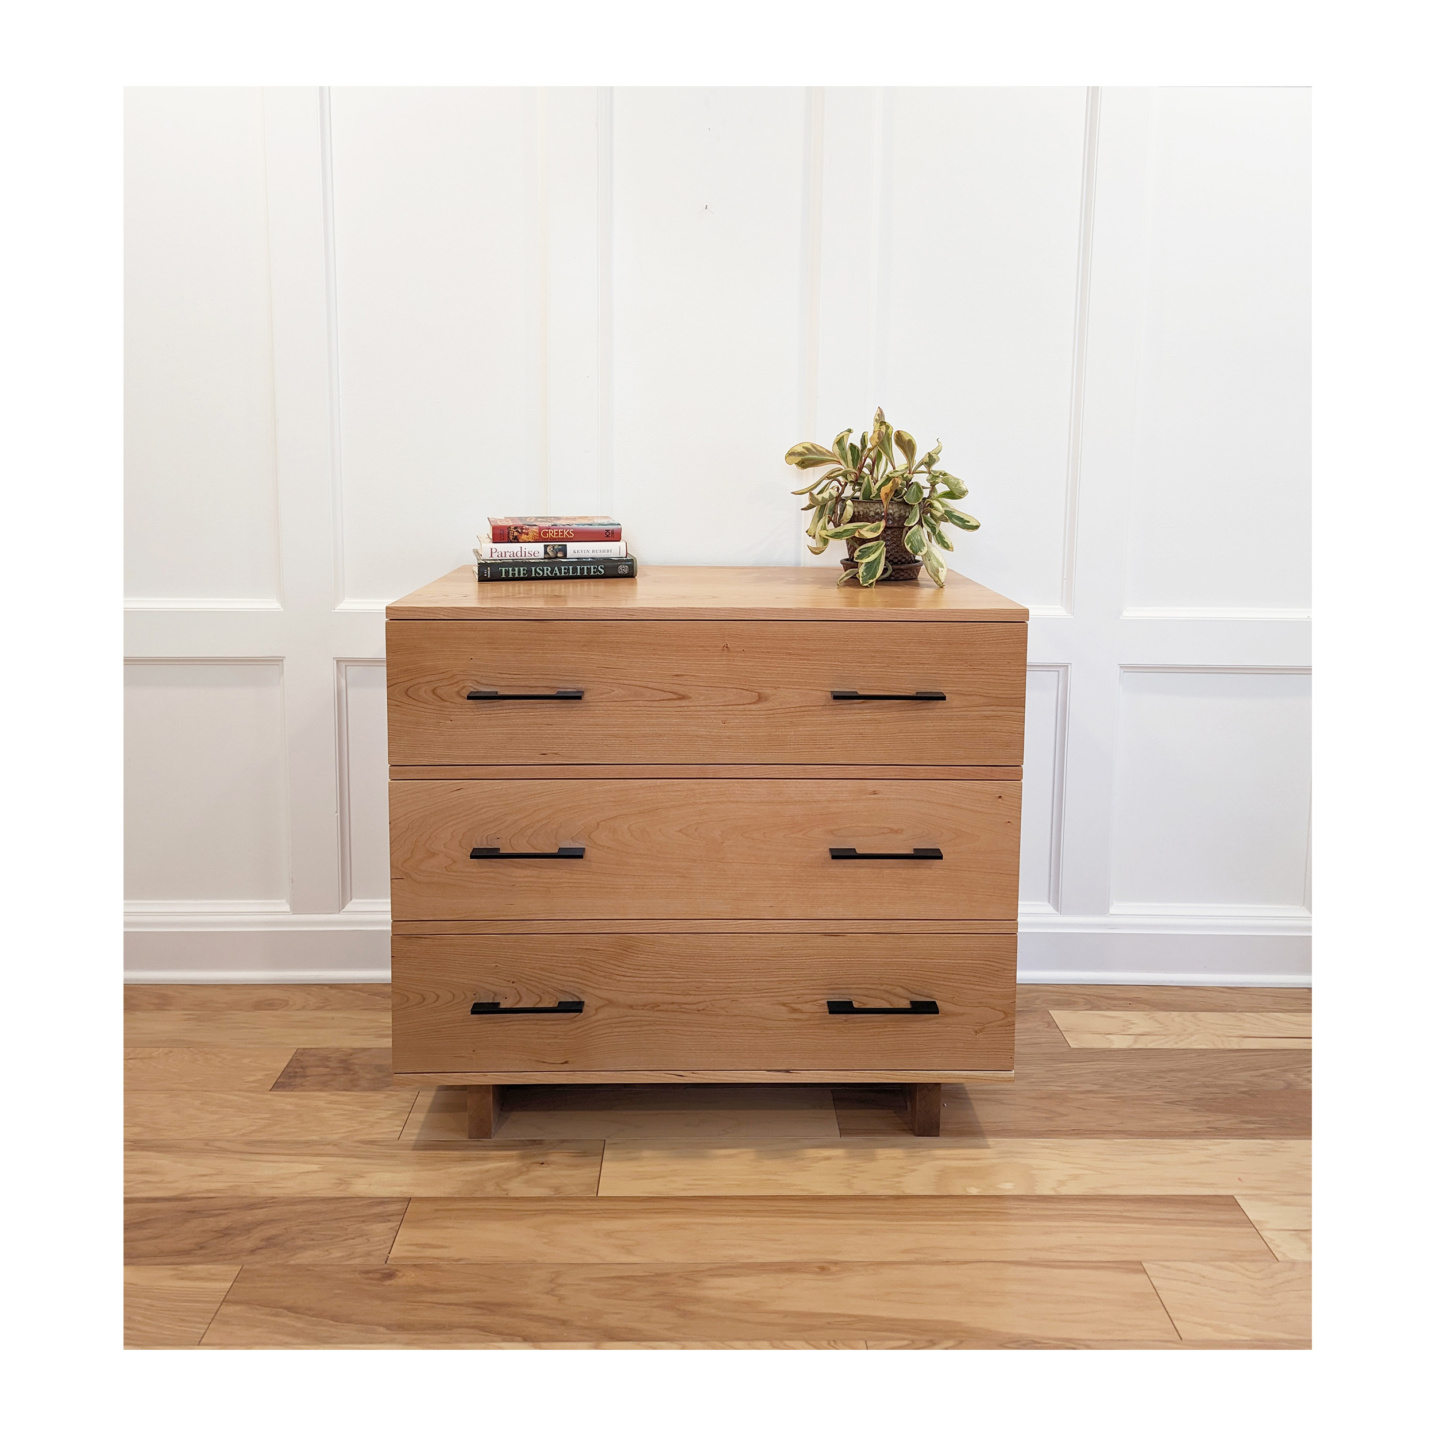 Three drawer handmade dresser with a simple style in cherry wood